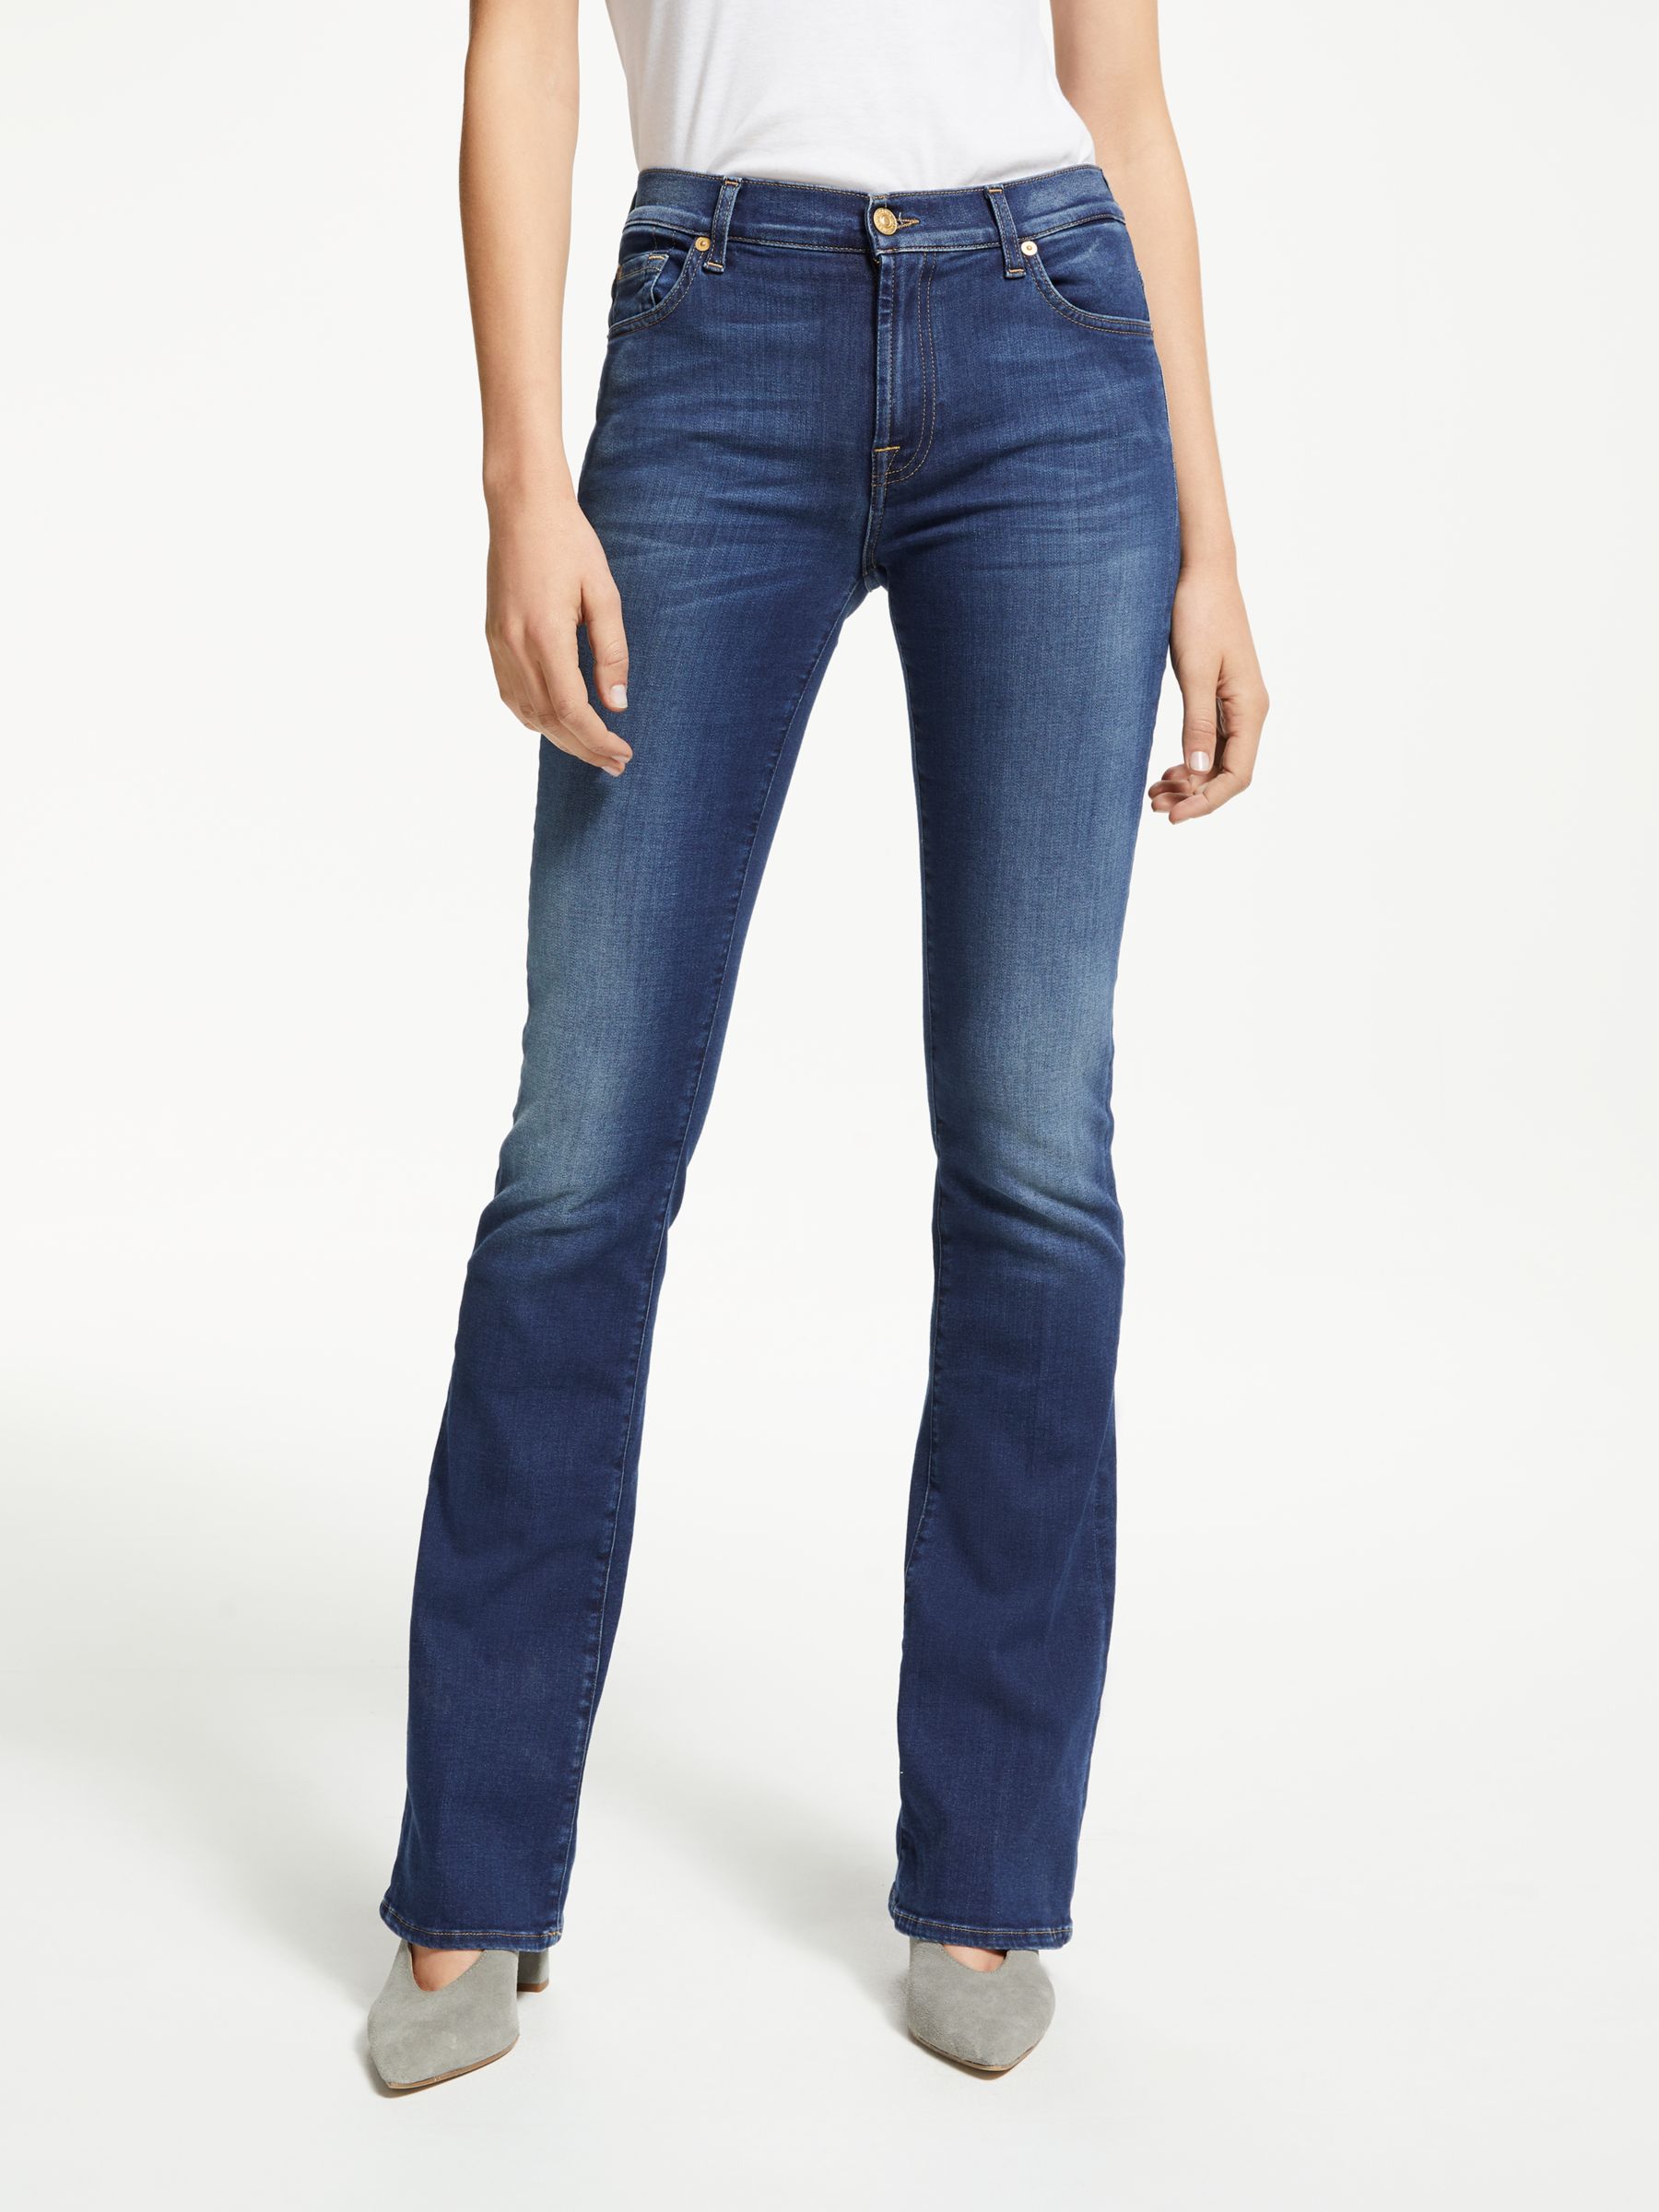 seven for all mankind plus size jeans